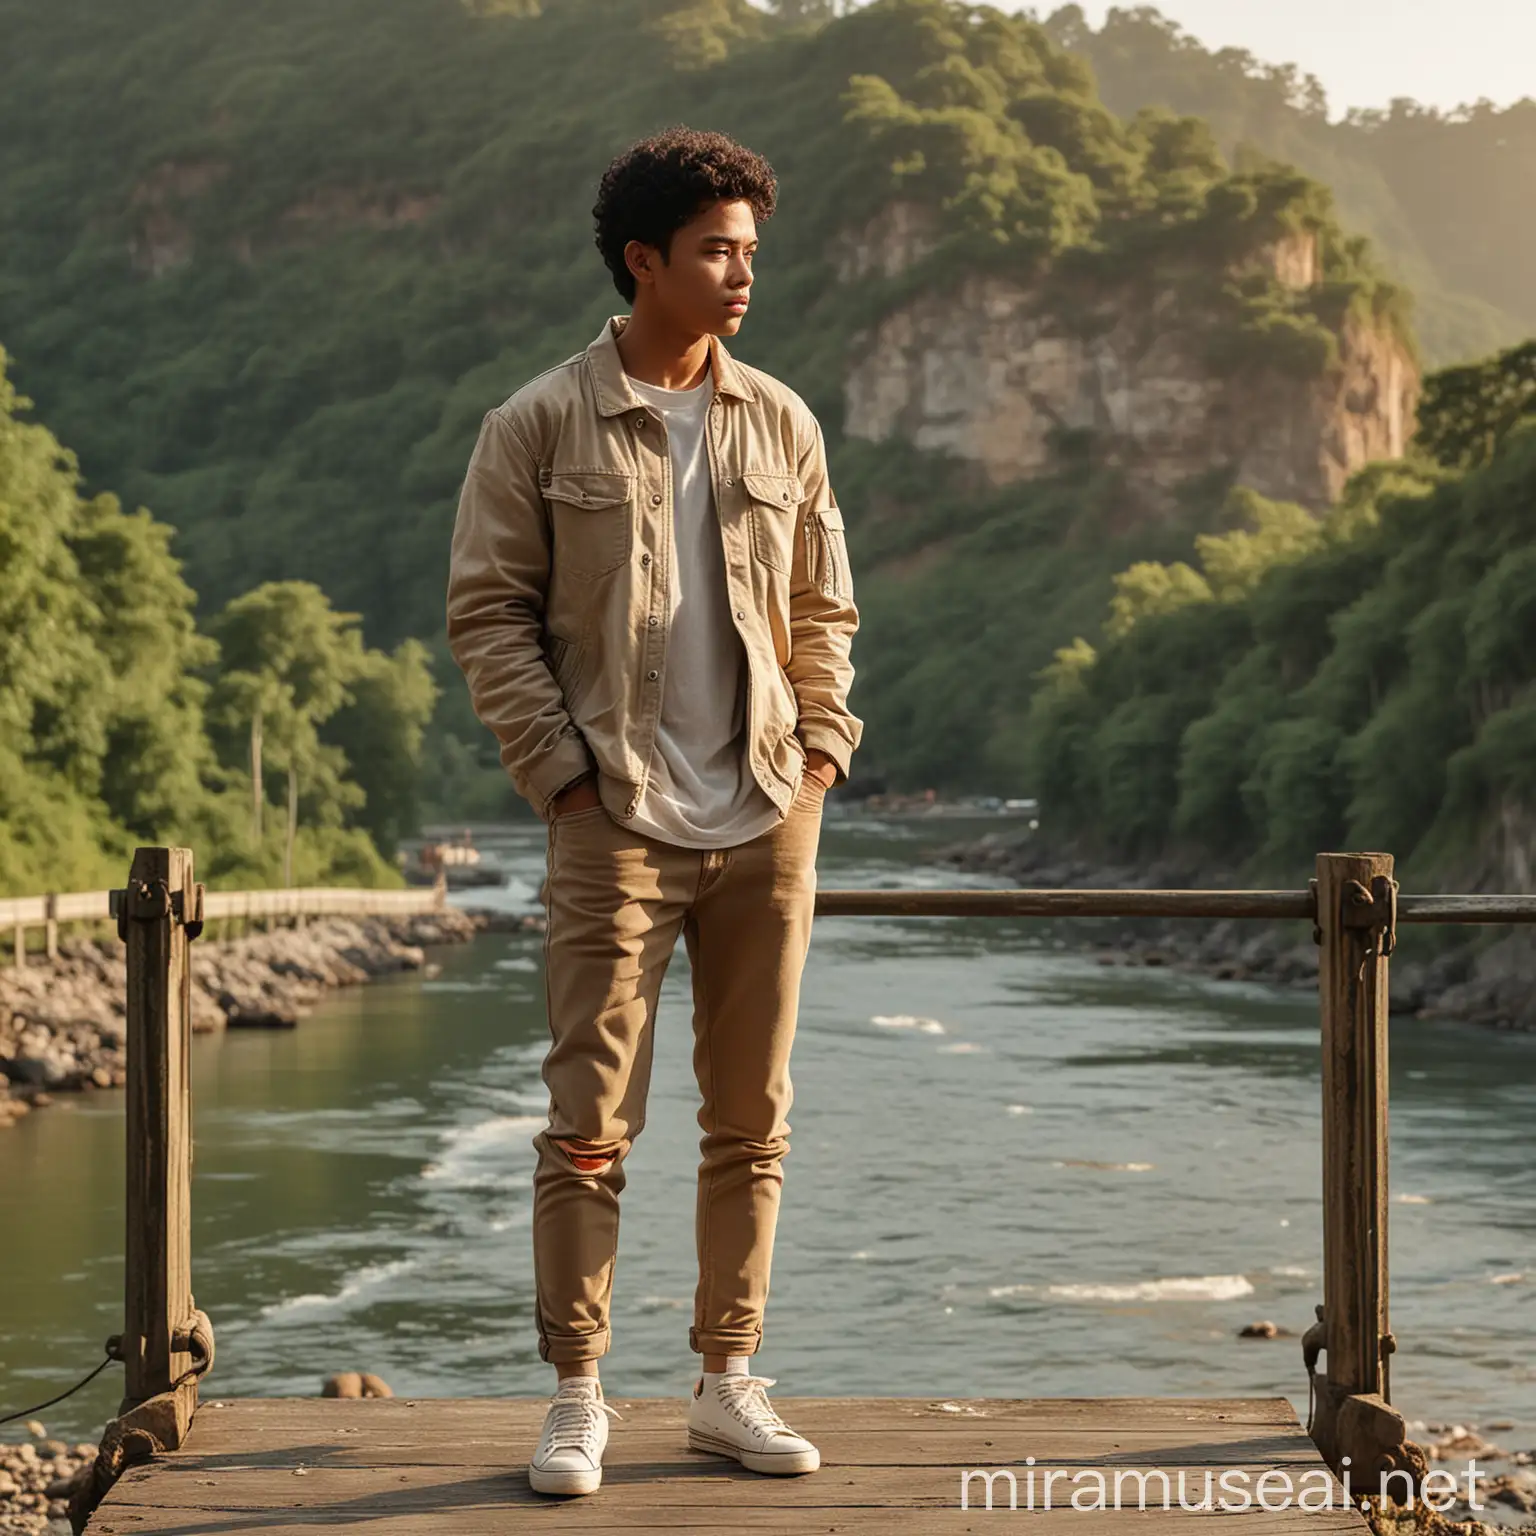 Young Indonesian Man Leaning on Old Bridge Over River at Dusk